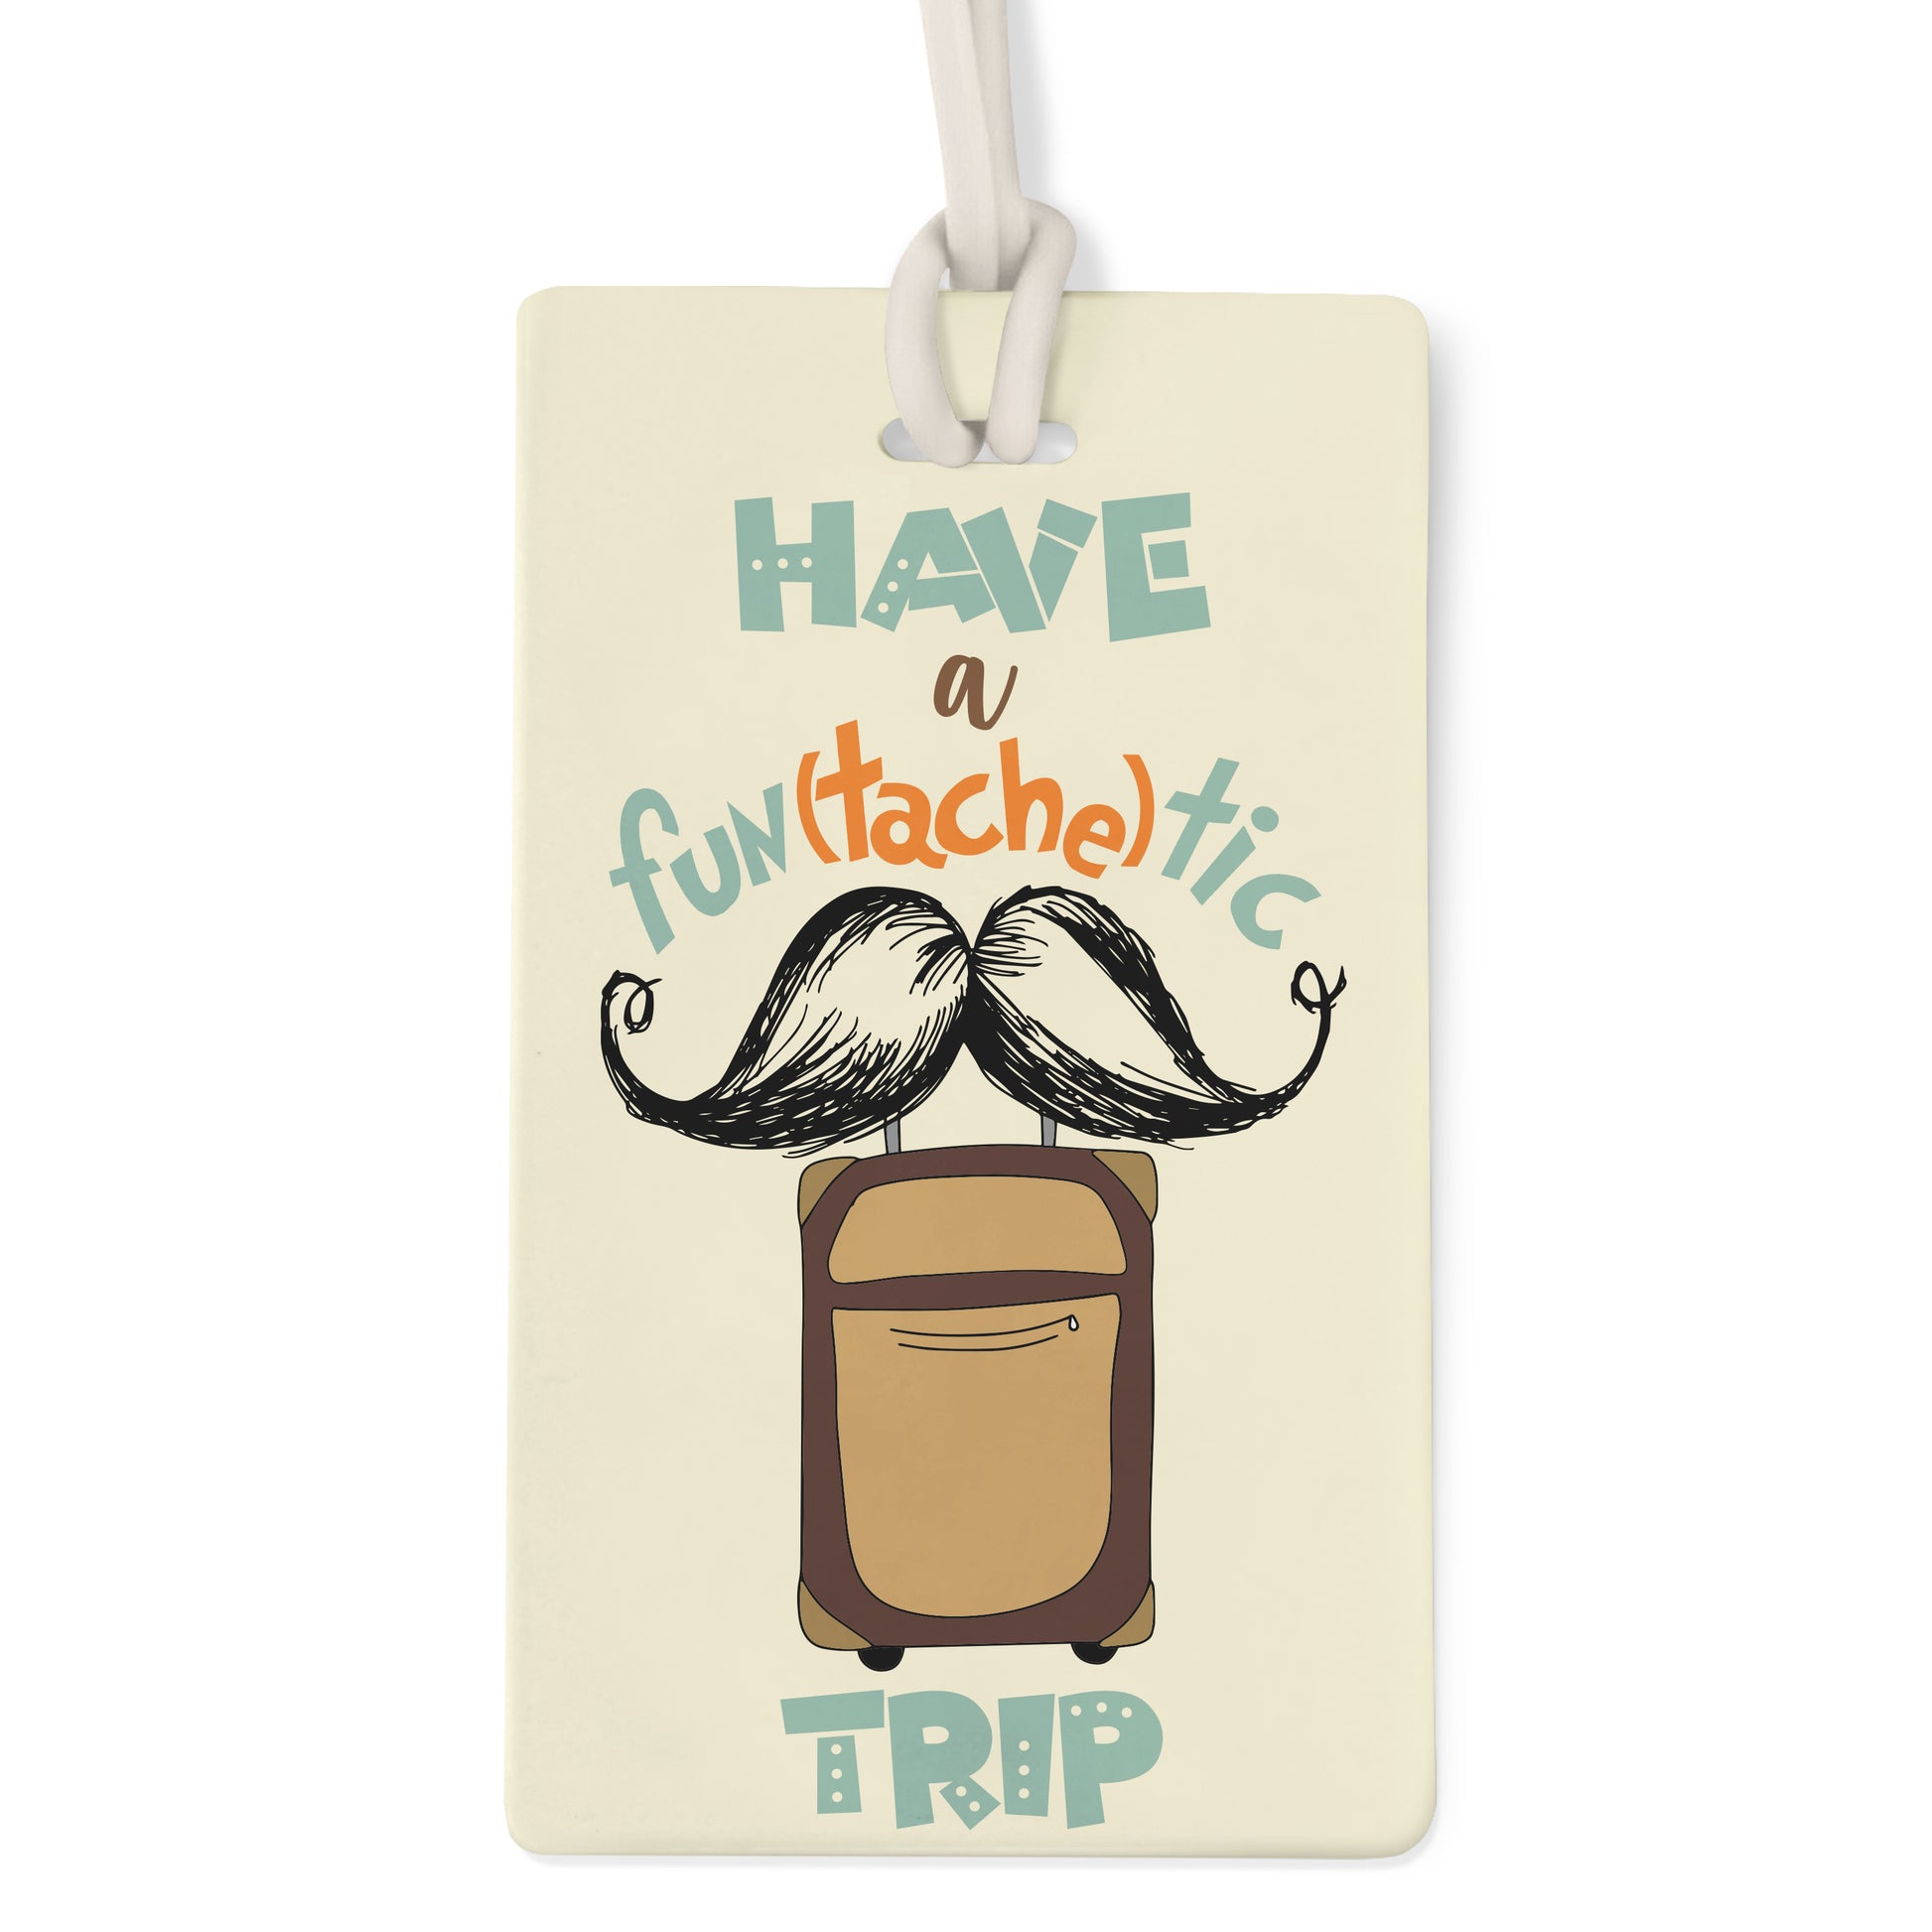 Urbanhand urban hand Fun(tache)tic Bag tag luggage Personalised Cute quirky travel accessories mens trips 